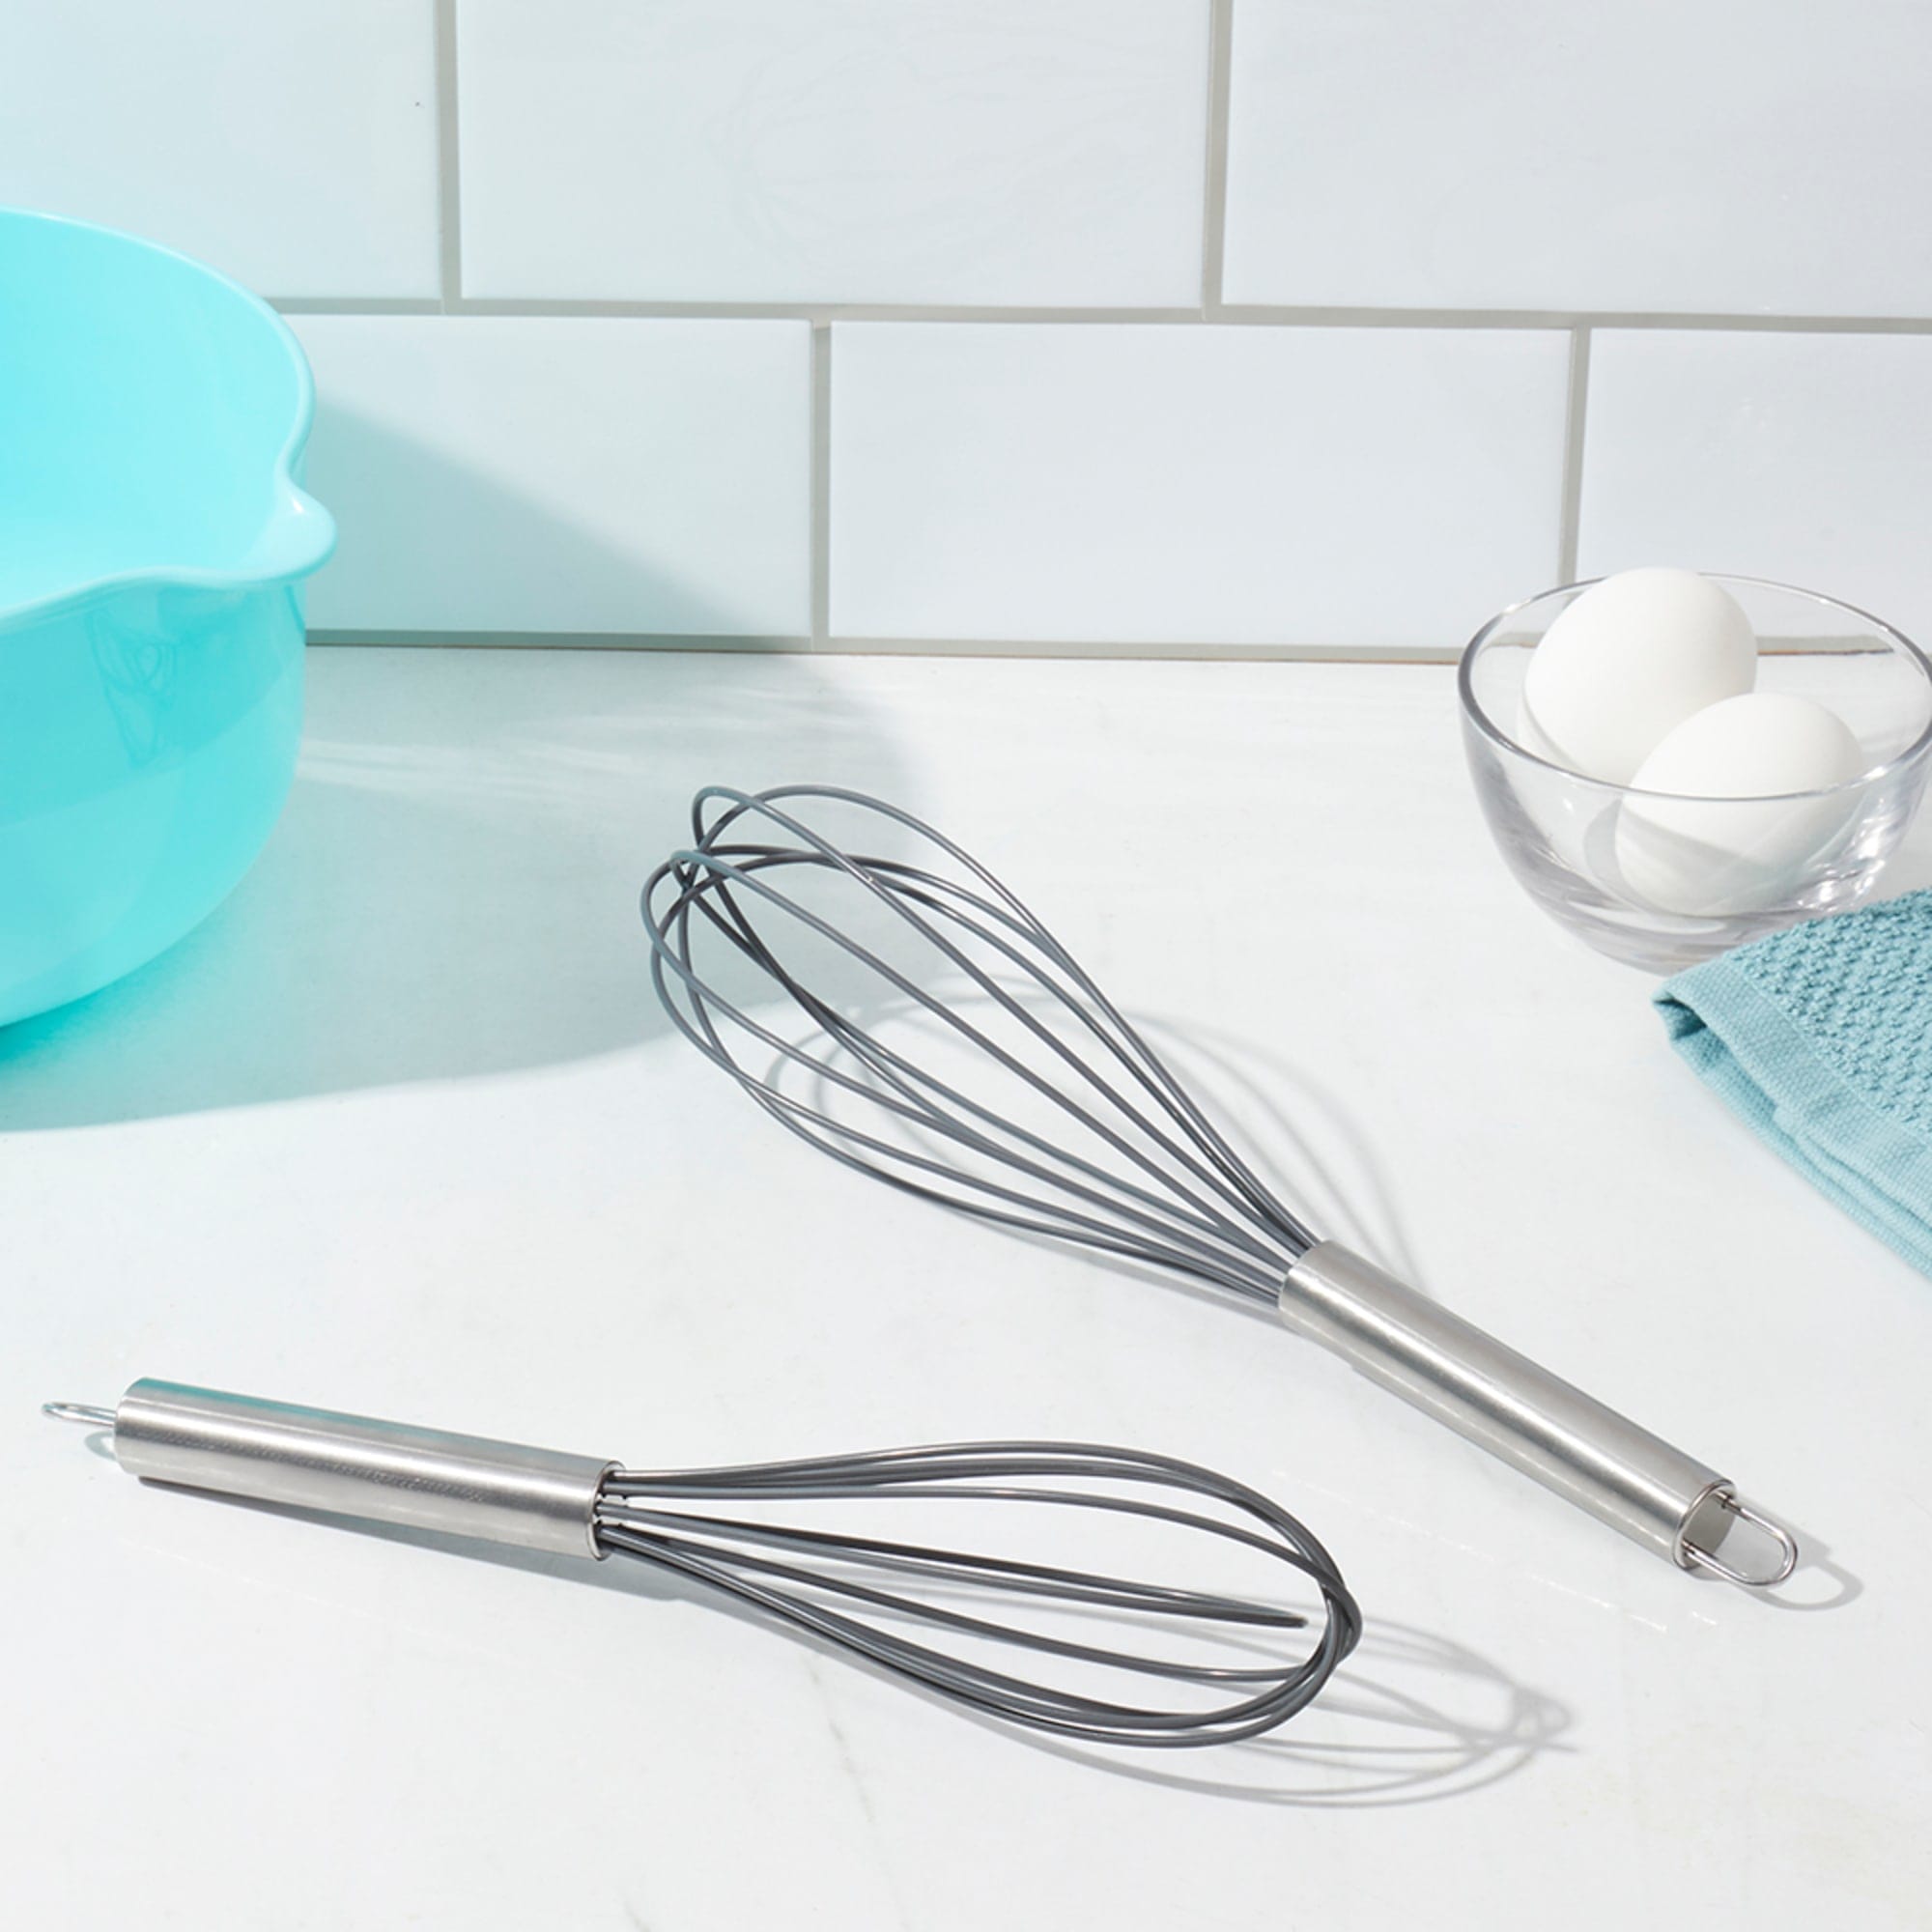 Home Basics Silicone Balloon Whisk with Stainless Steel Handle $3.00 EACH, CASE PACK OF 24